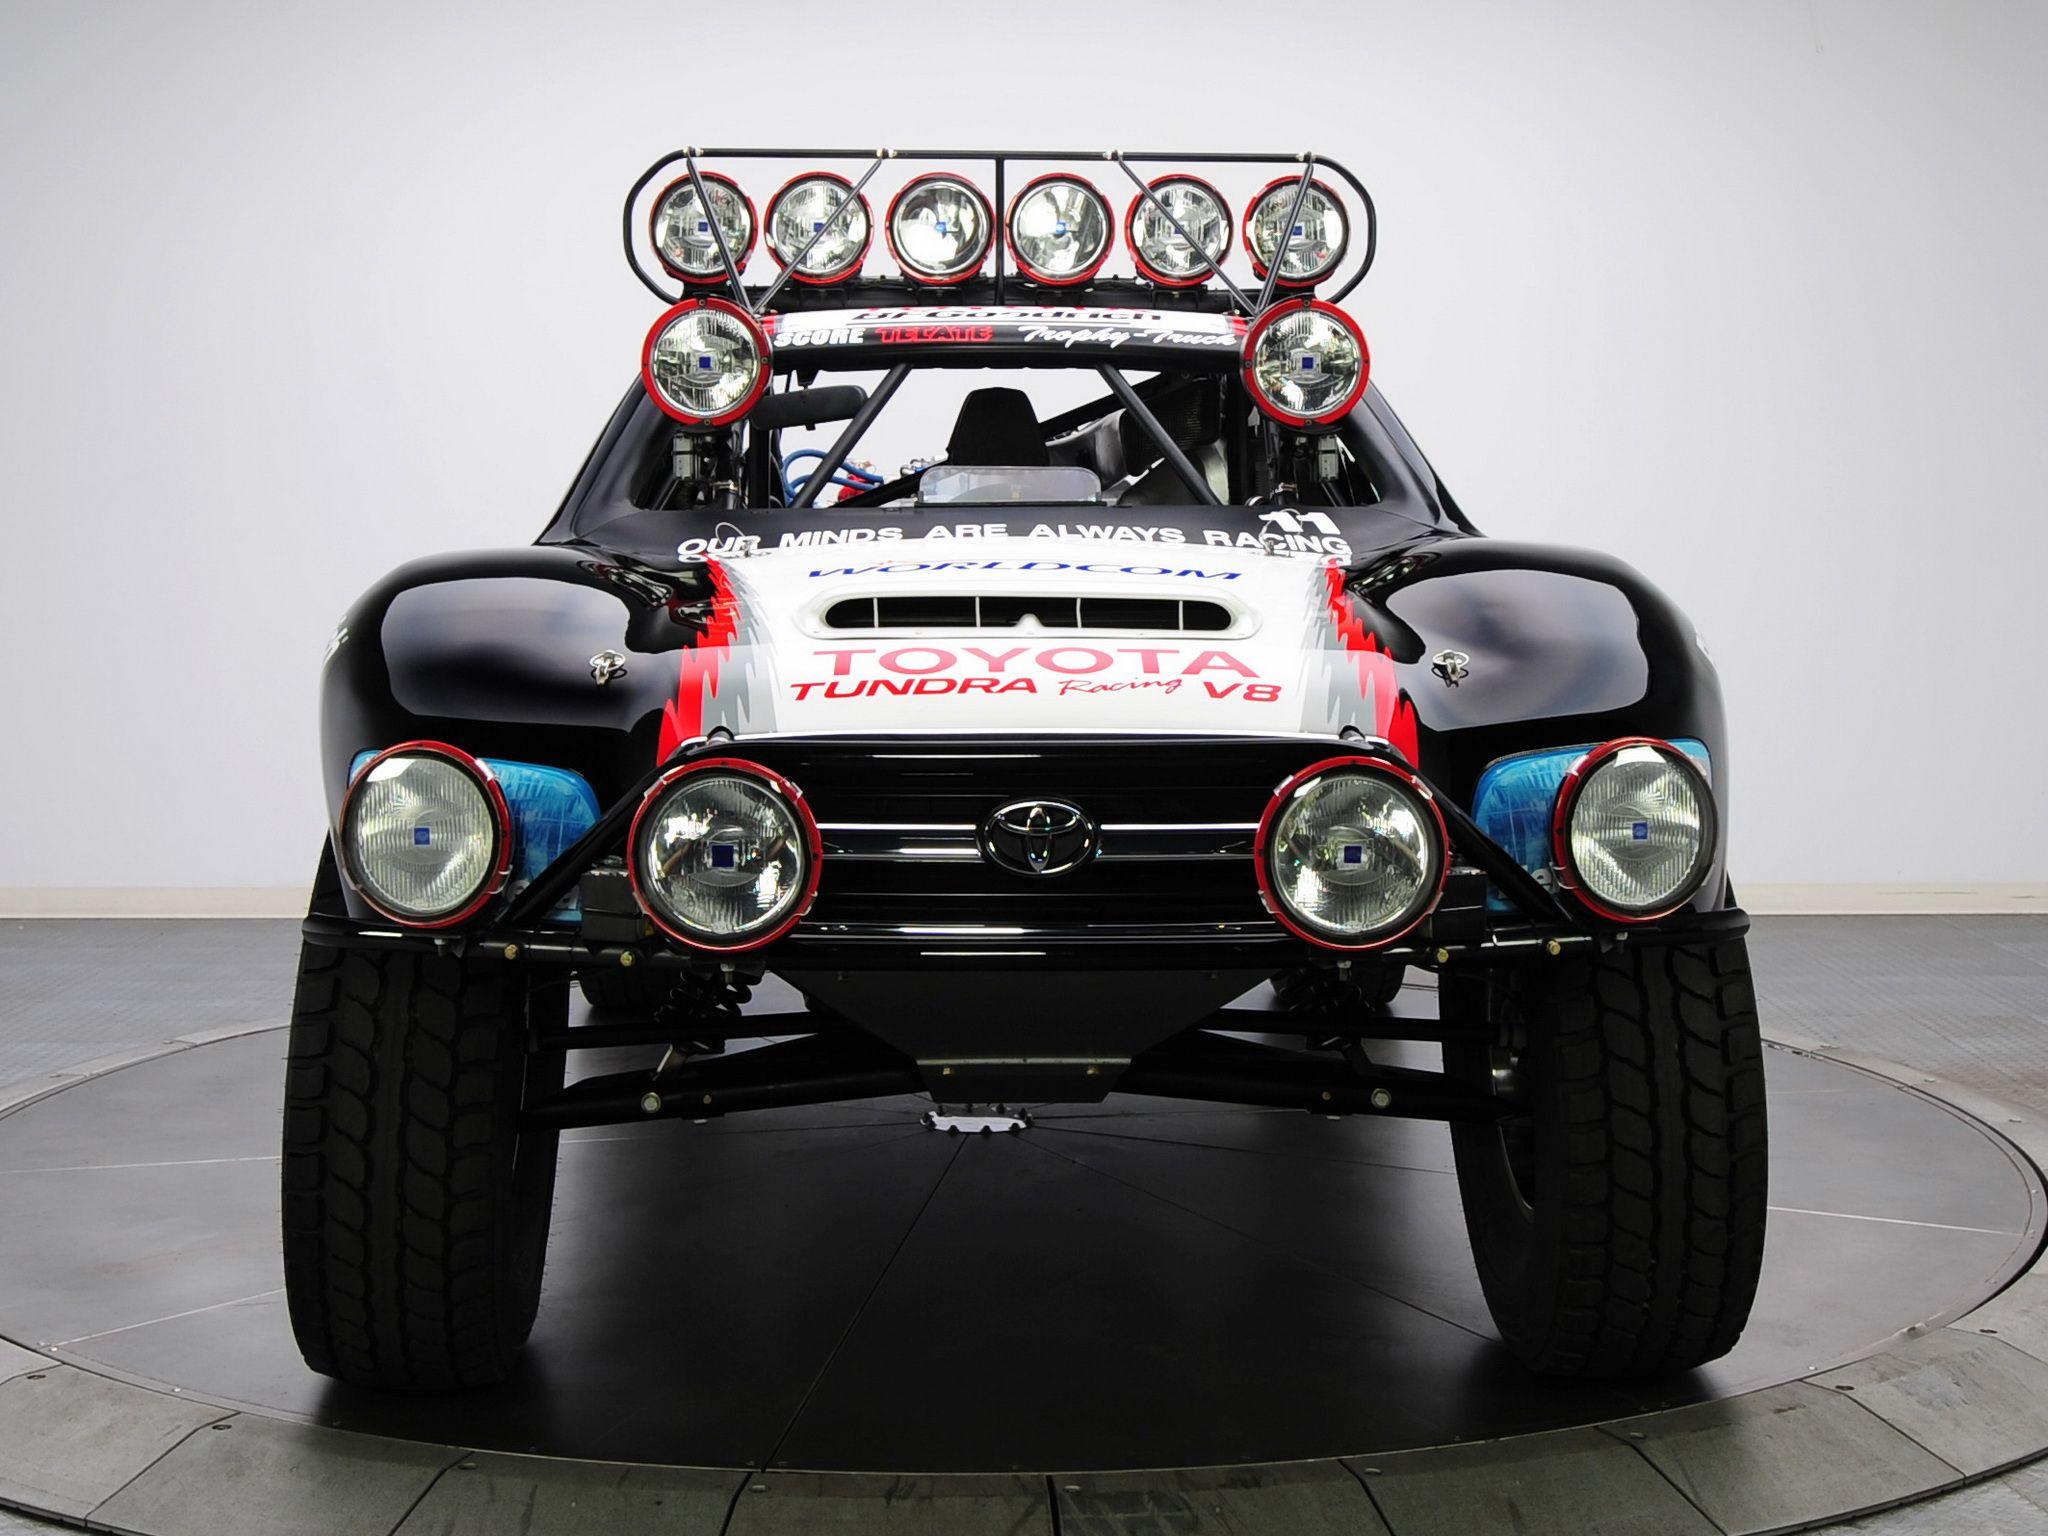 PPI Toyota Trophy Truck race racing offroad pickup f